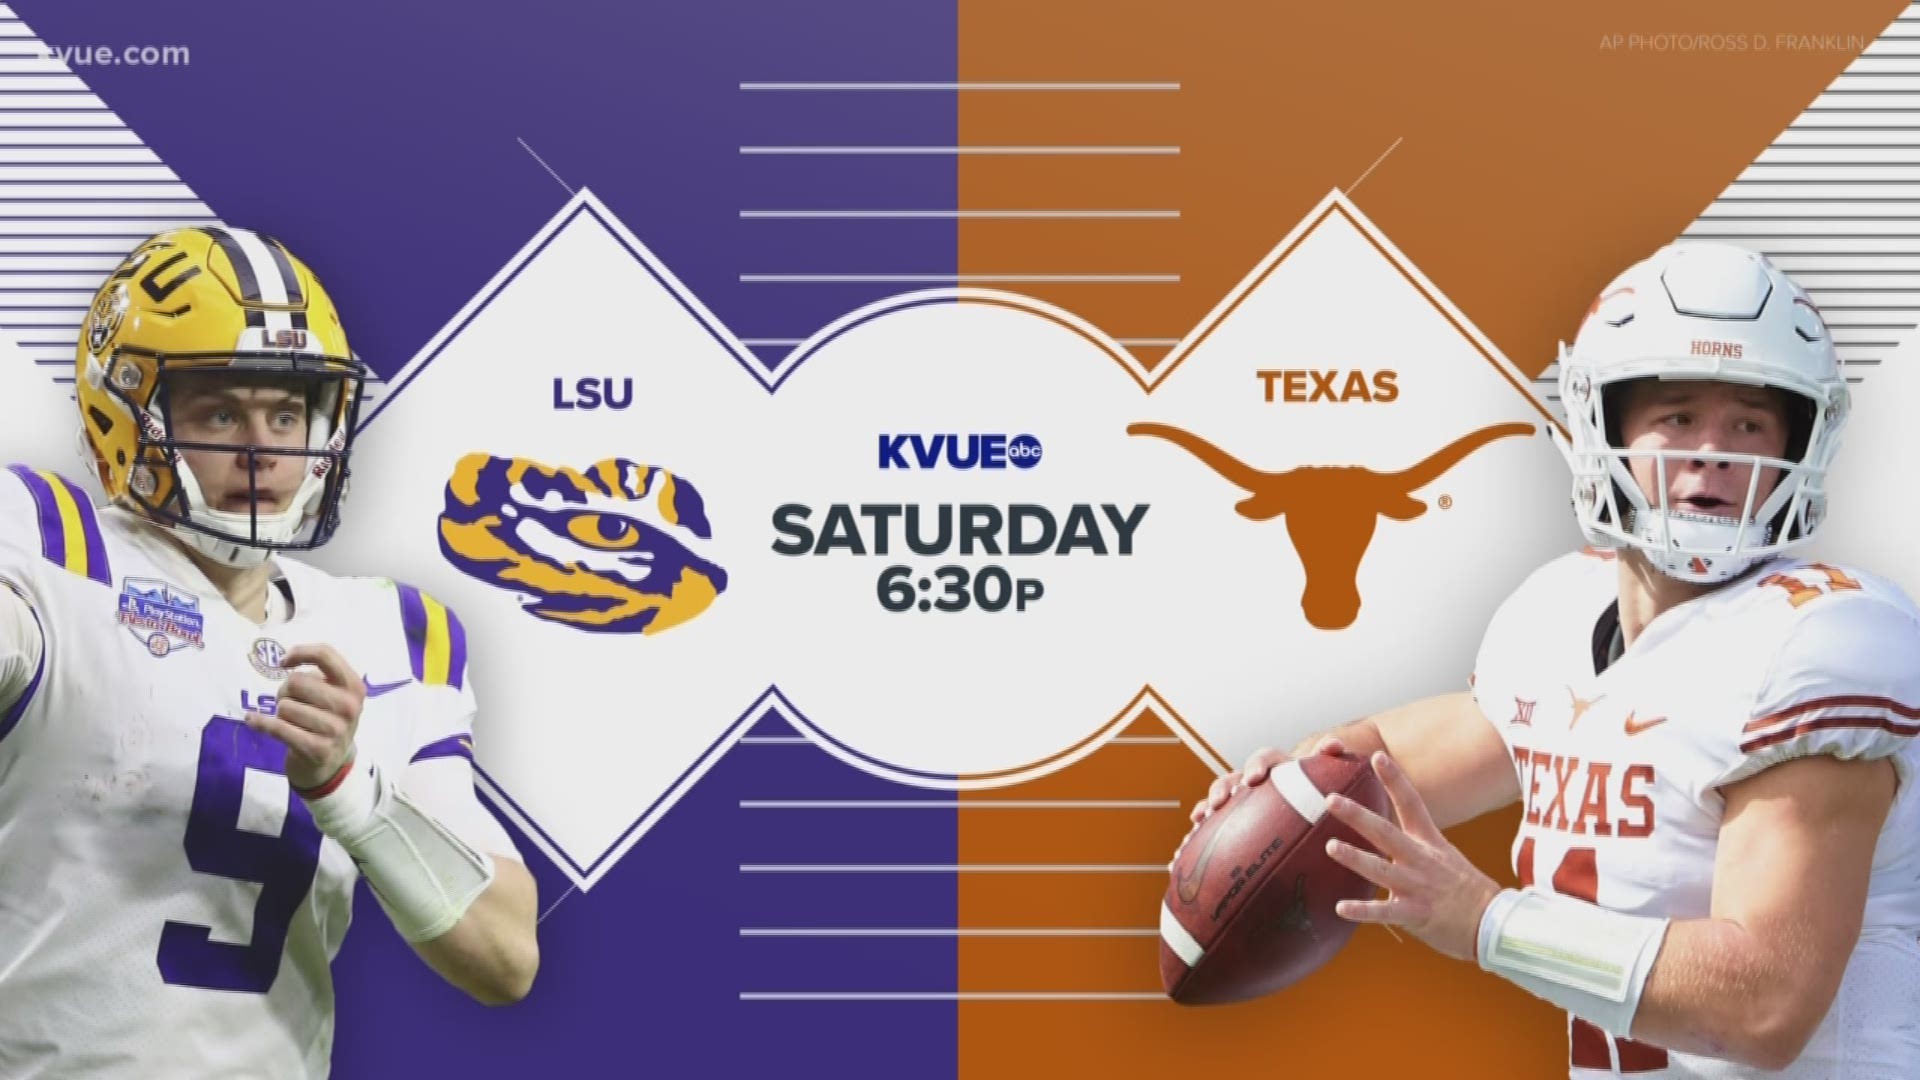 Tickets to UT vs. LSU game have Texassized prices